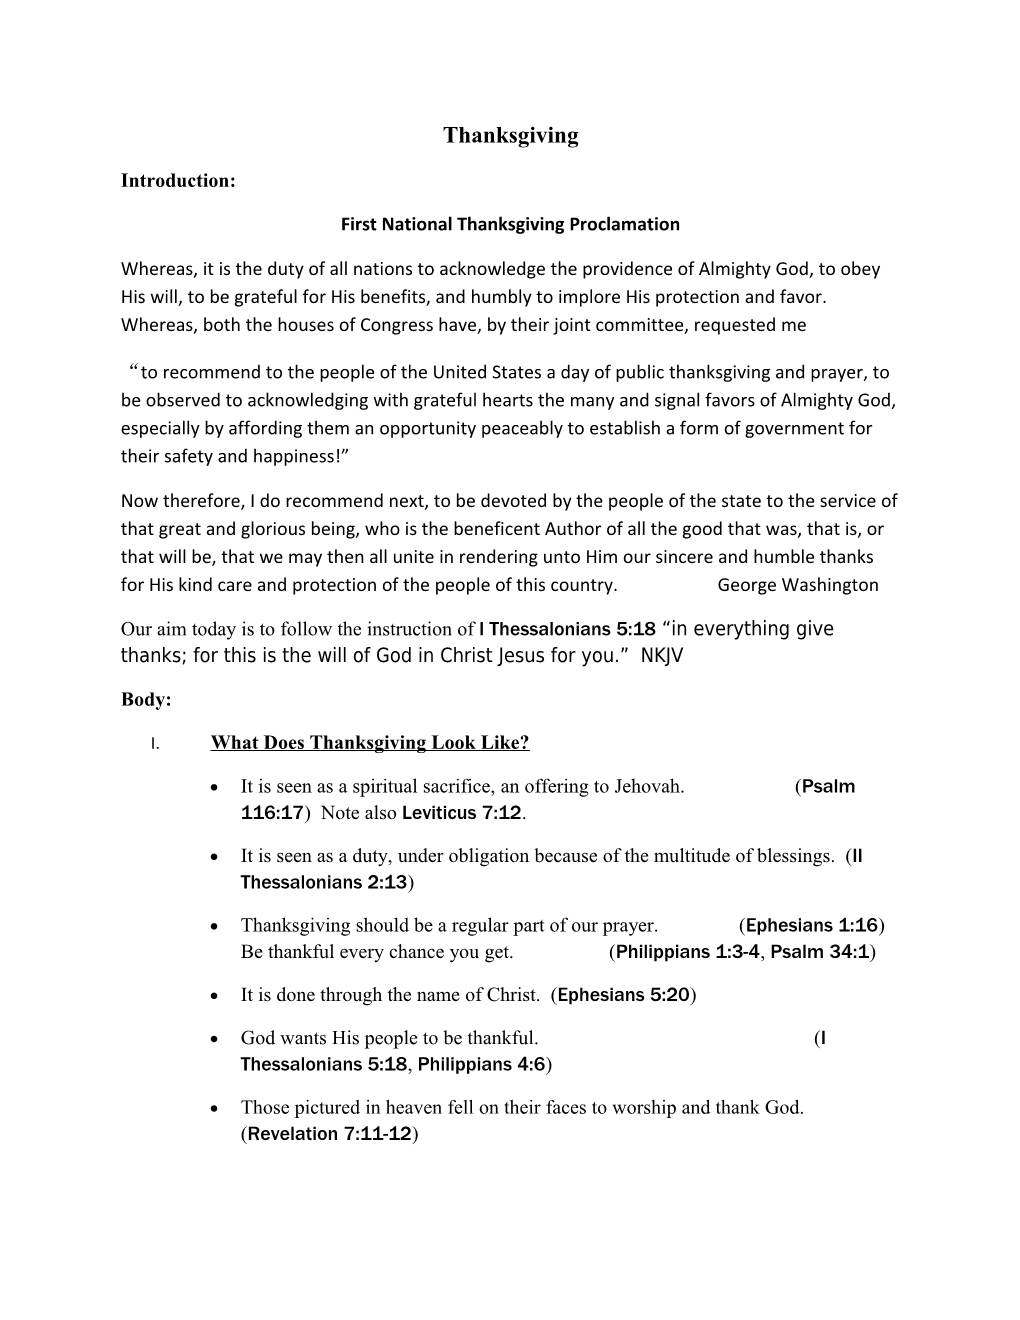 First National Thanksgiving Proclamation